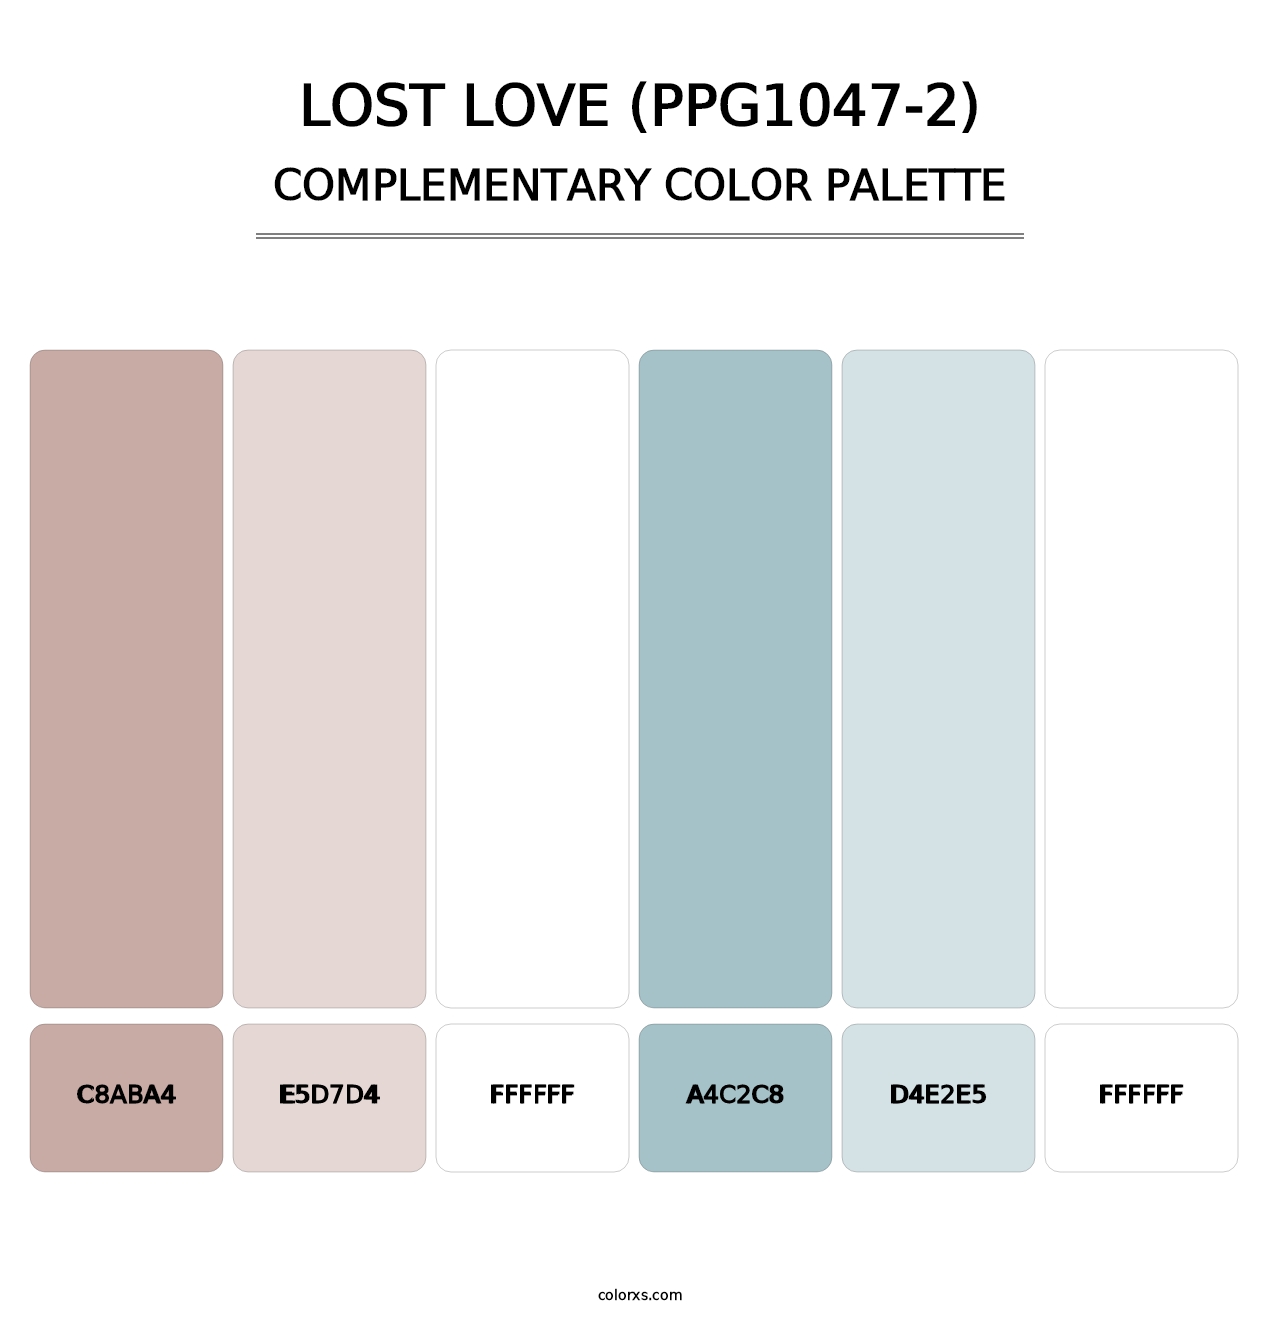 Lost Love (PPG1047-2) - Complementary Color Palette